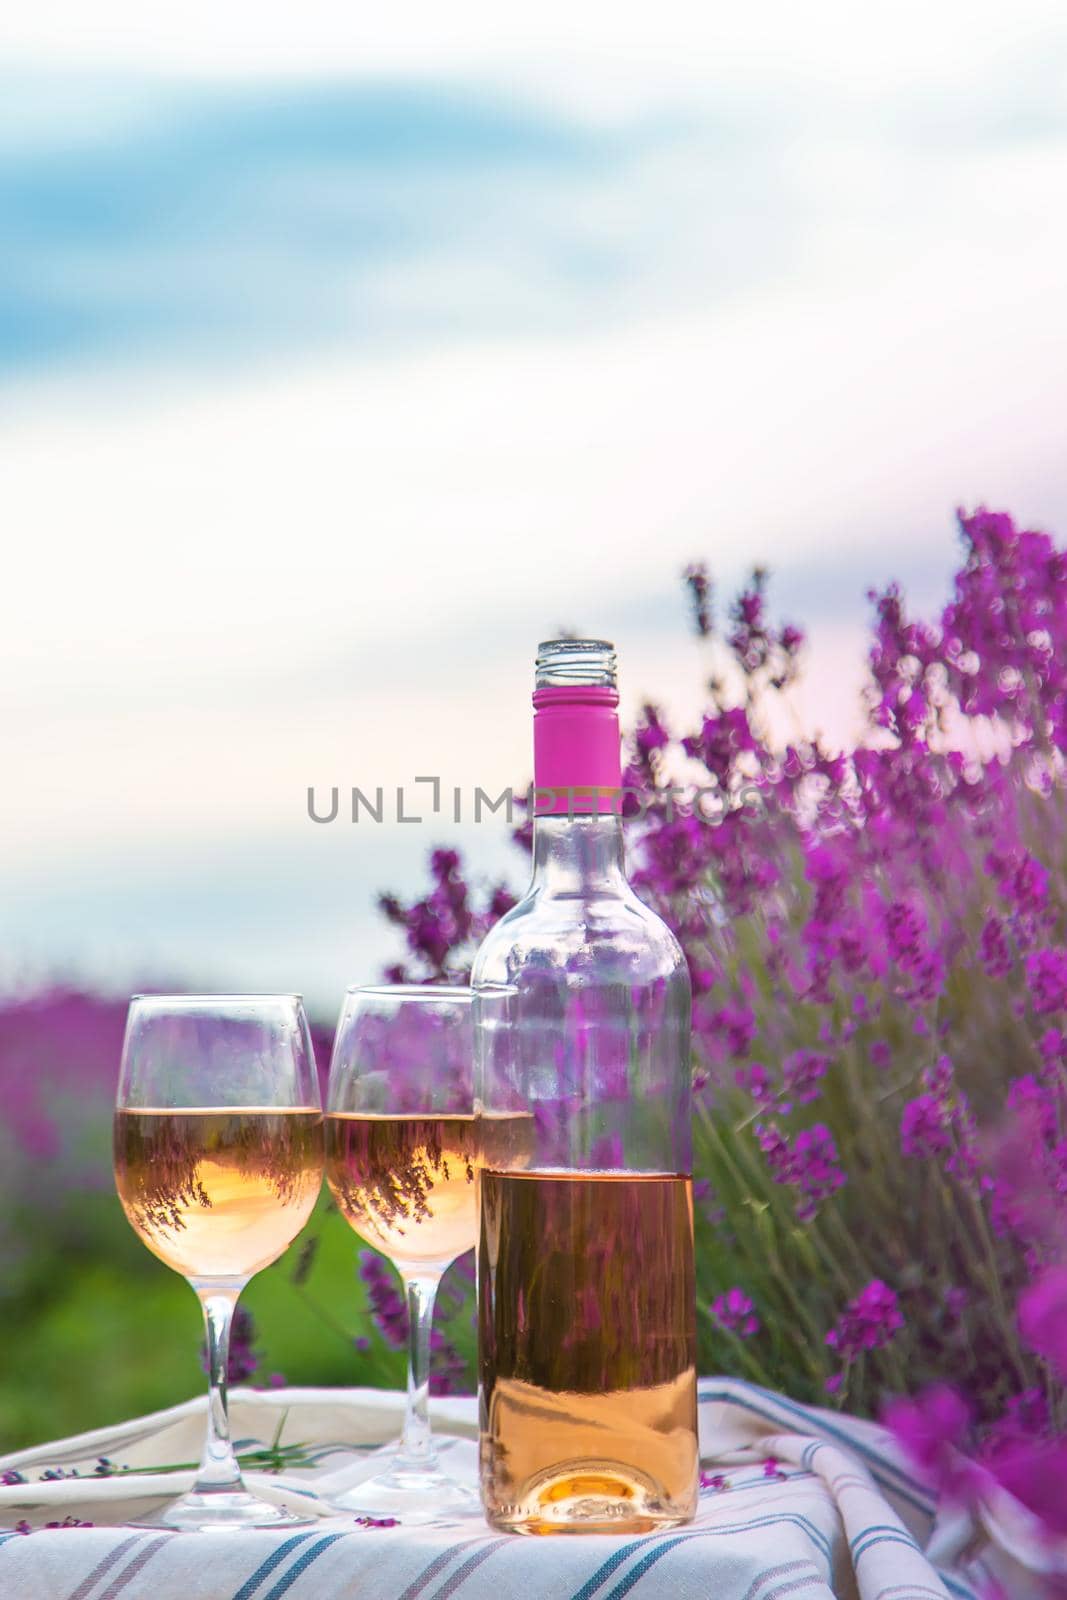 Wine in a lavender field. Selective focus. Food.